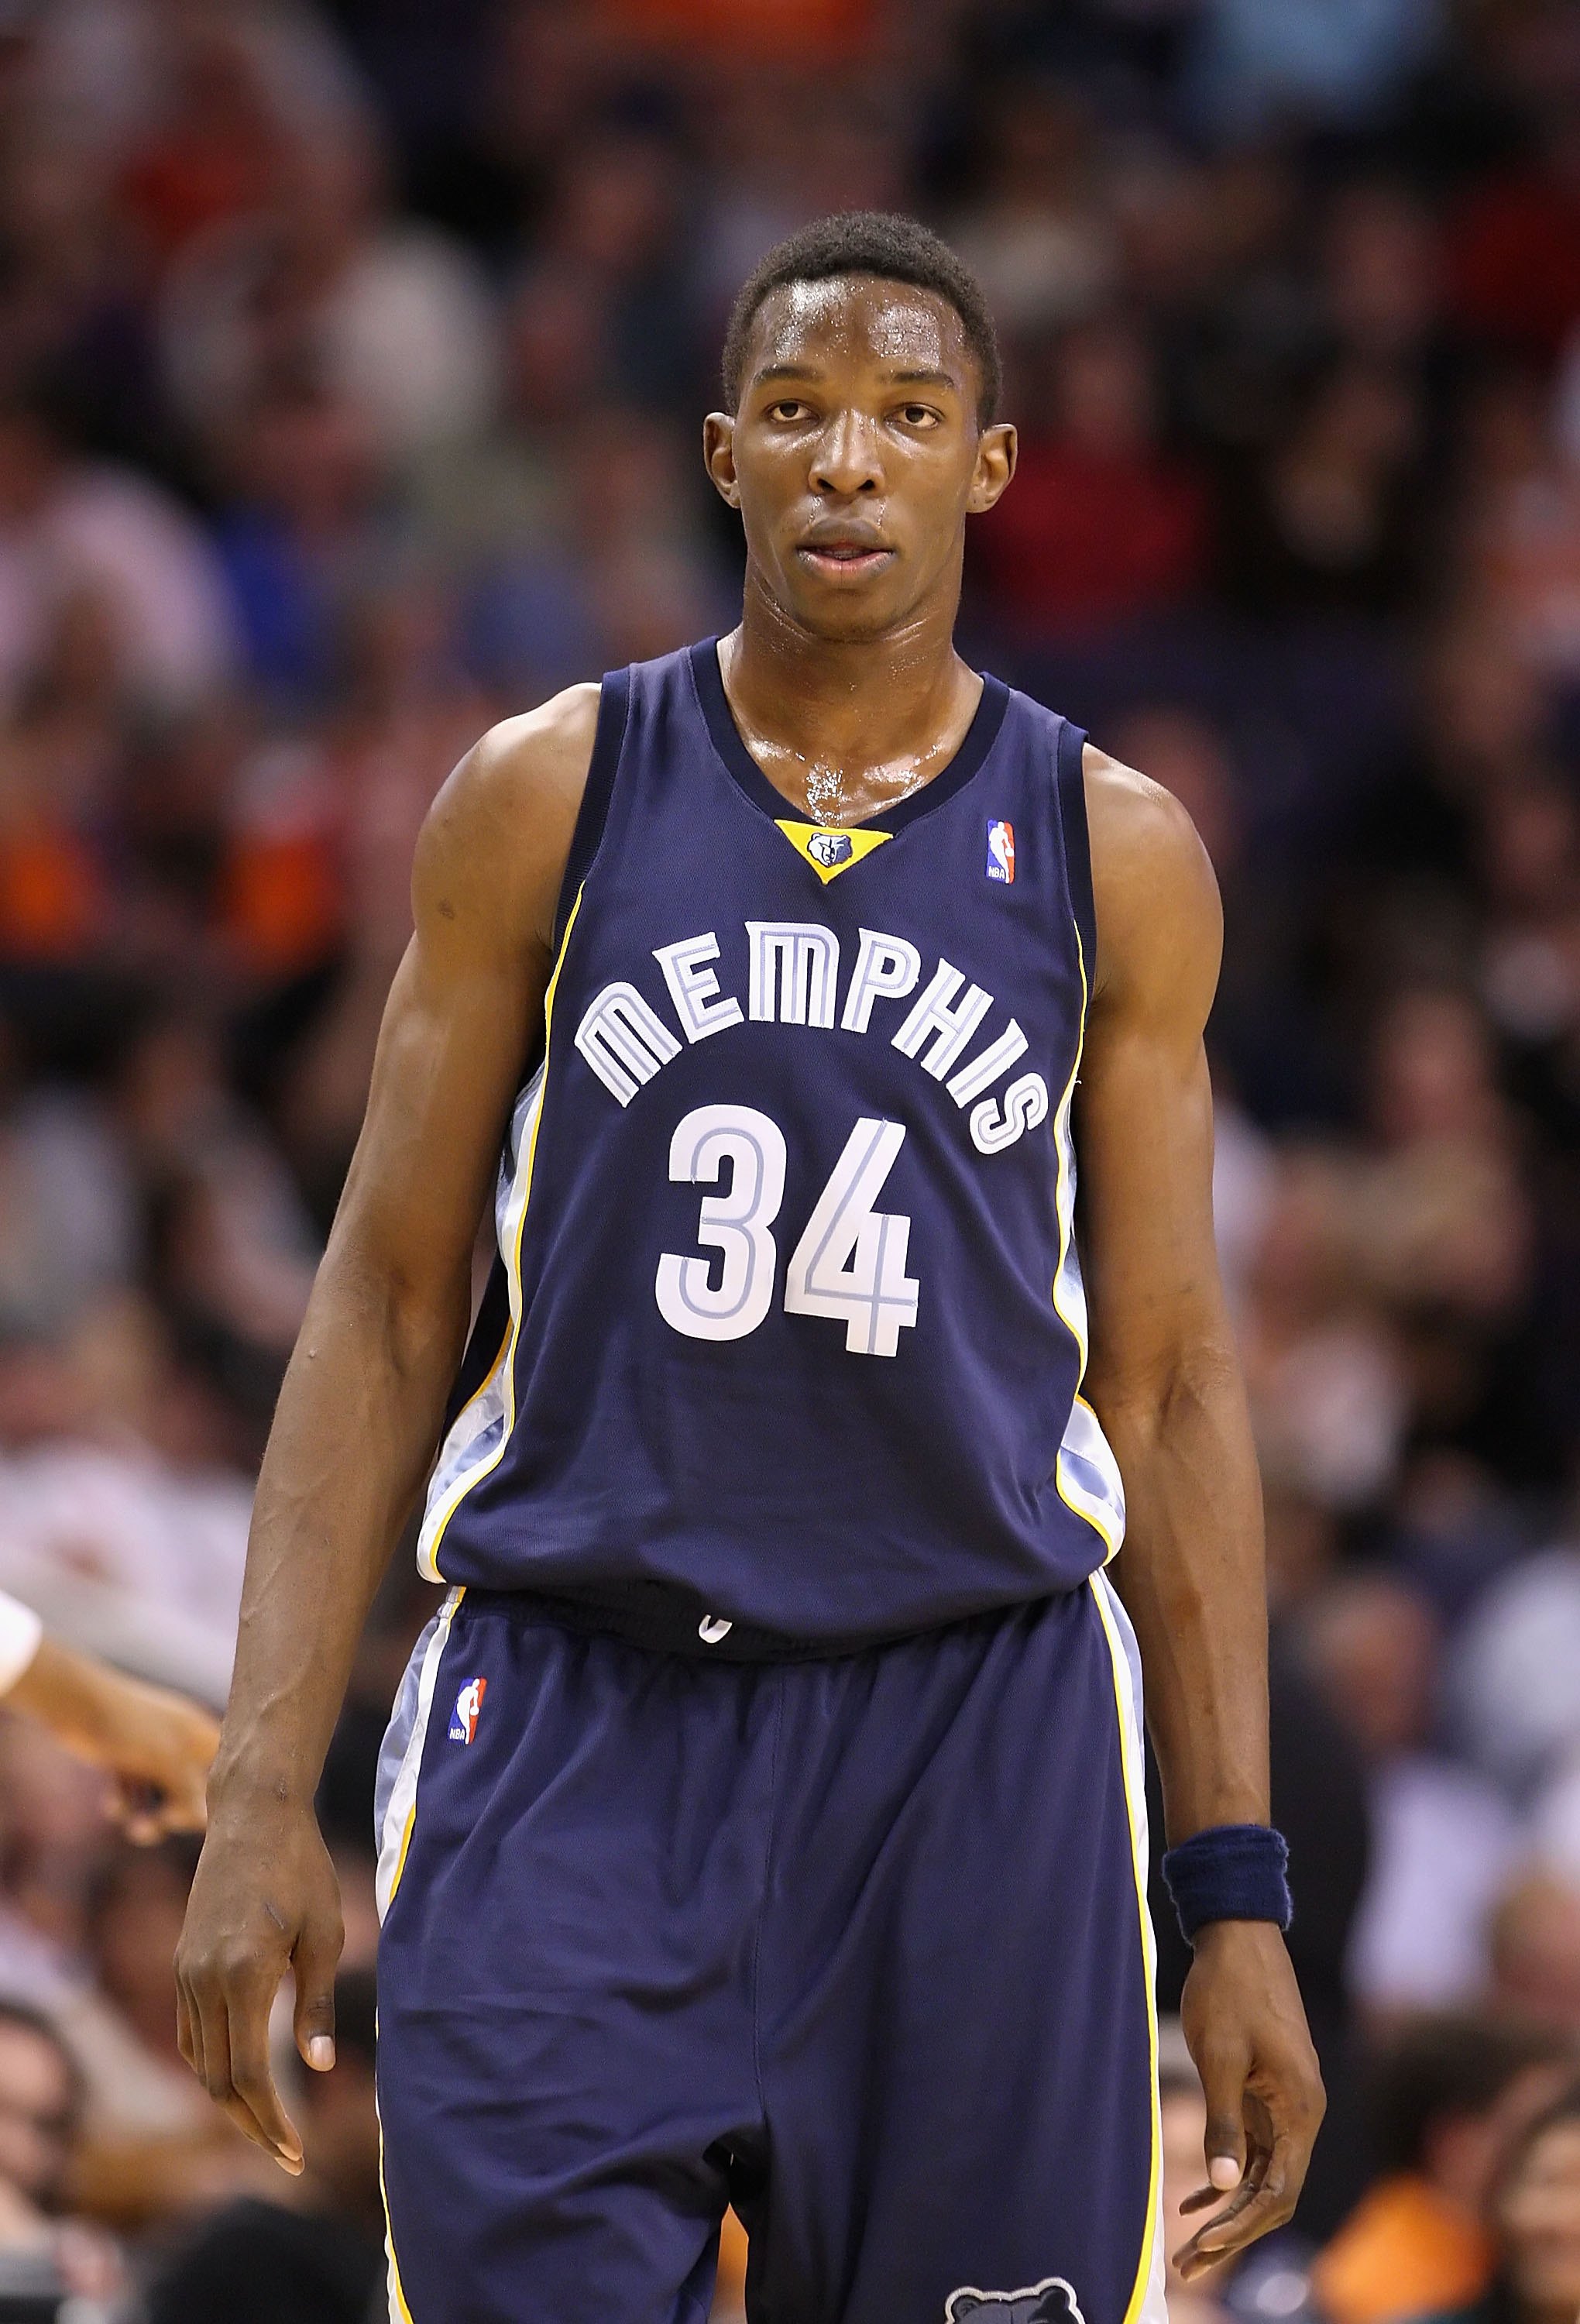 PHOENIX - NOVEMBER 25:  Hasheem Thabeet #34 of the Memphis Grizzlies during the NBA game against the Phoenix Suns at US Airways Center on November 25, 2009 in Phoenix, Arizona.  The Suns defeated the Grizzlies 126-111.  NOTE TO USER: User expressly acknow